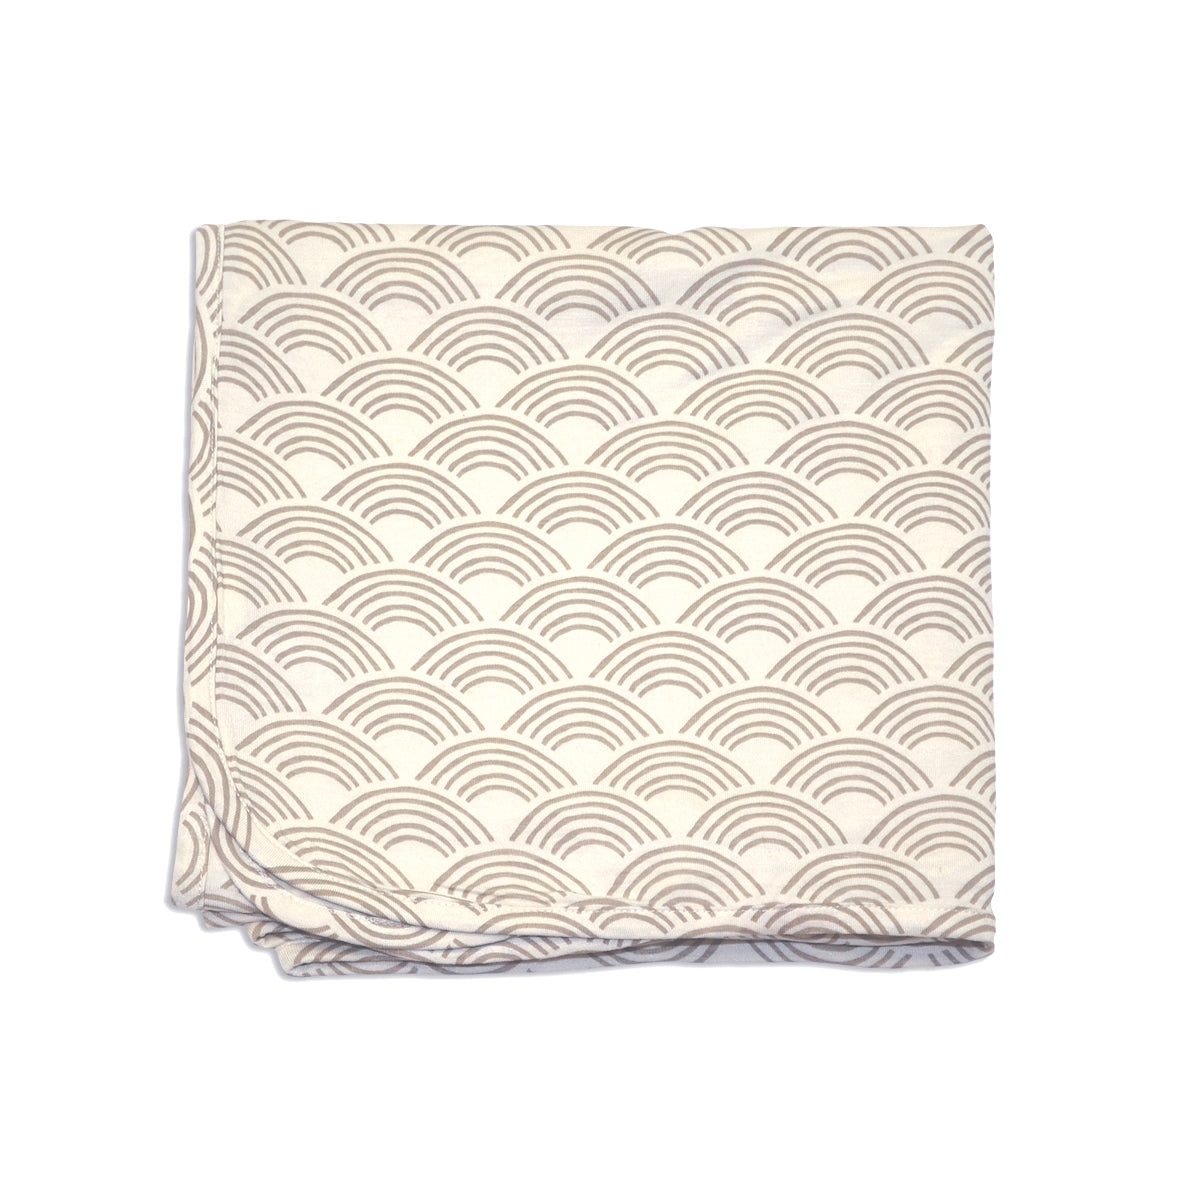 bamboo swaddle blanket wobbly wave print